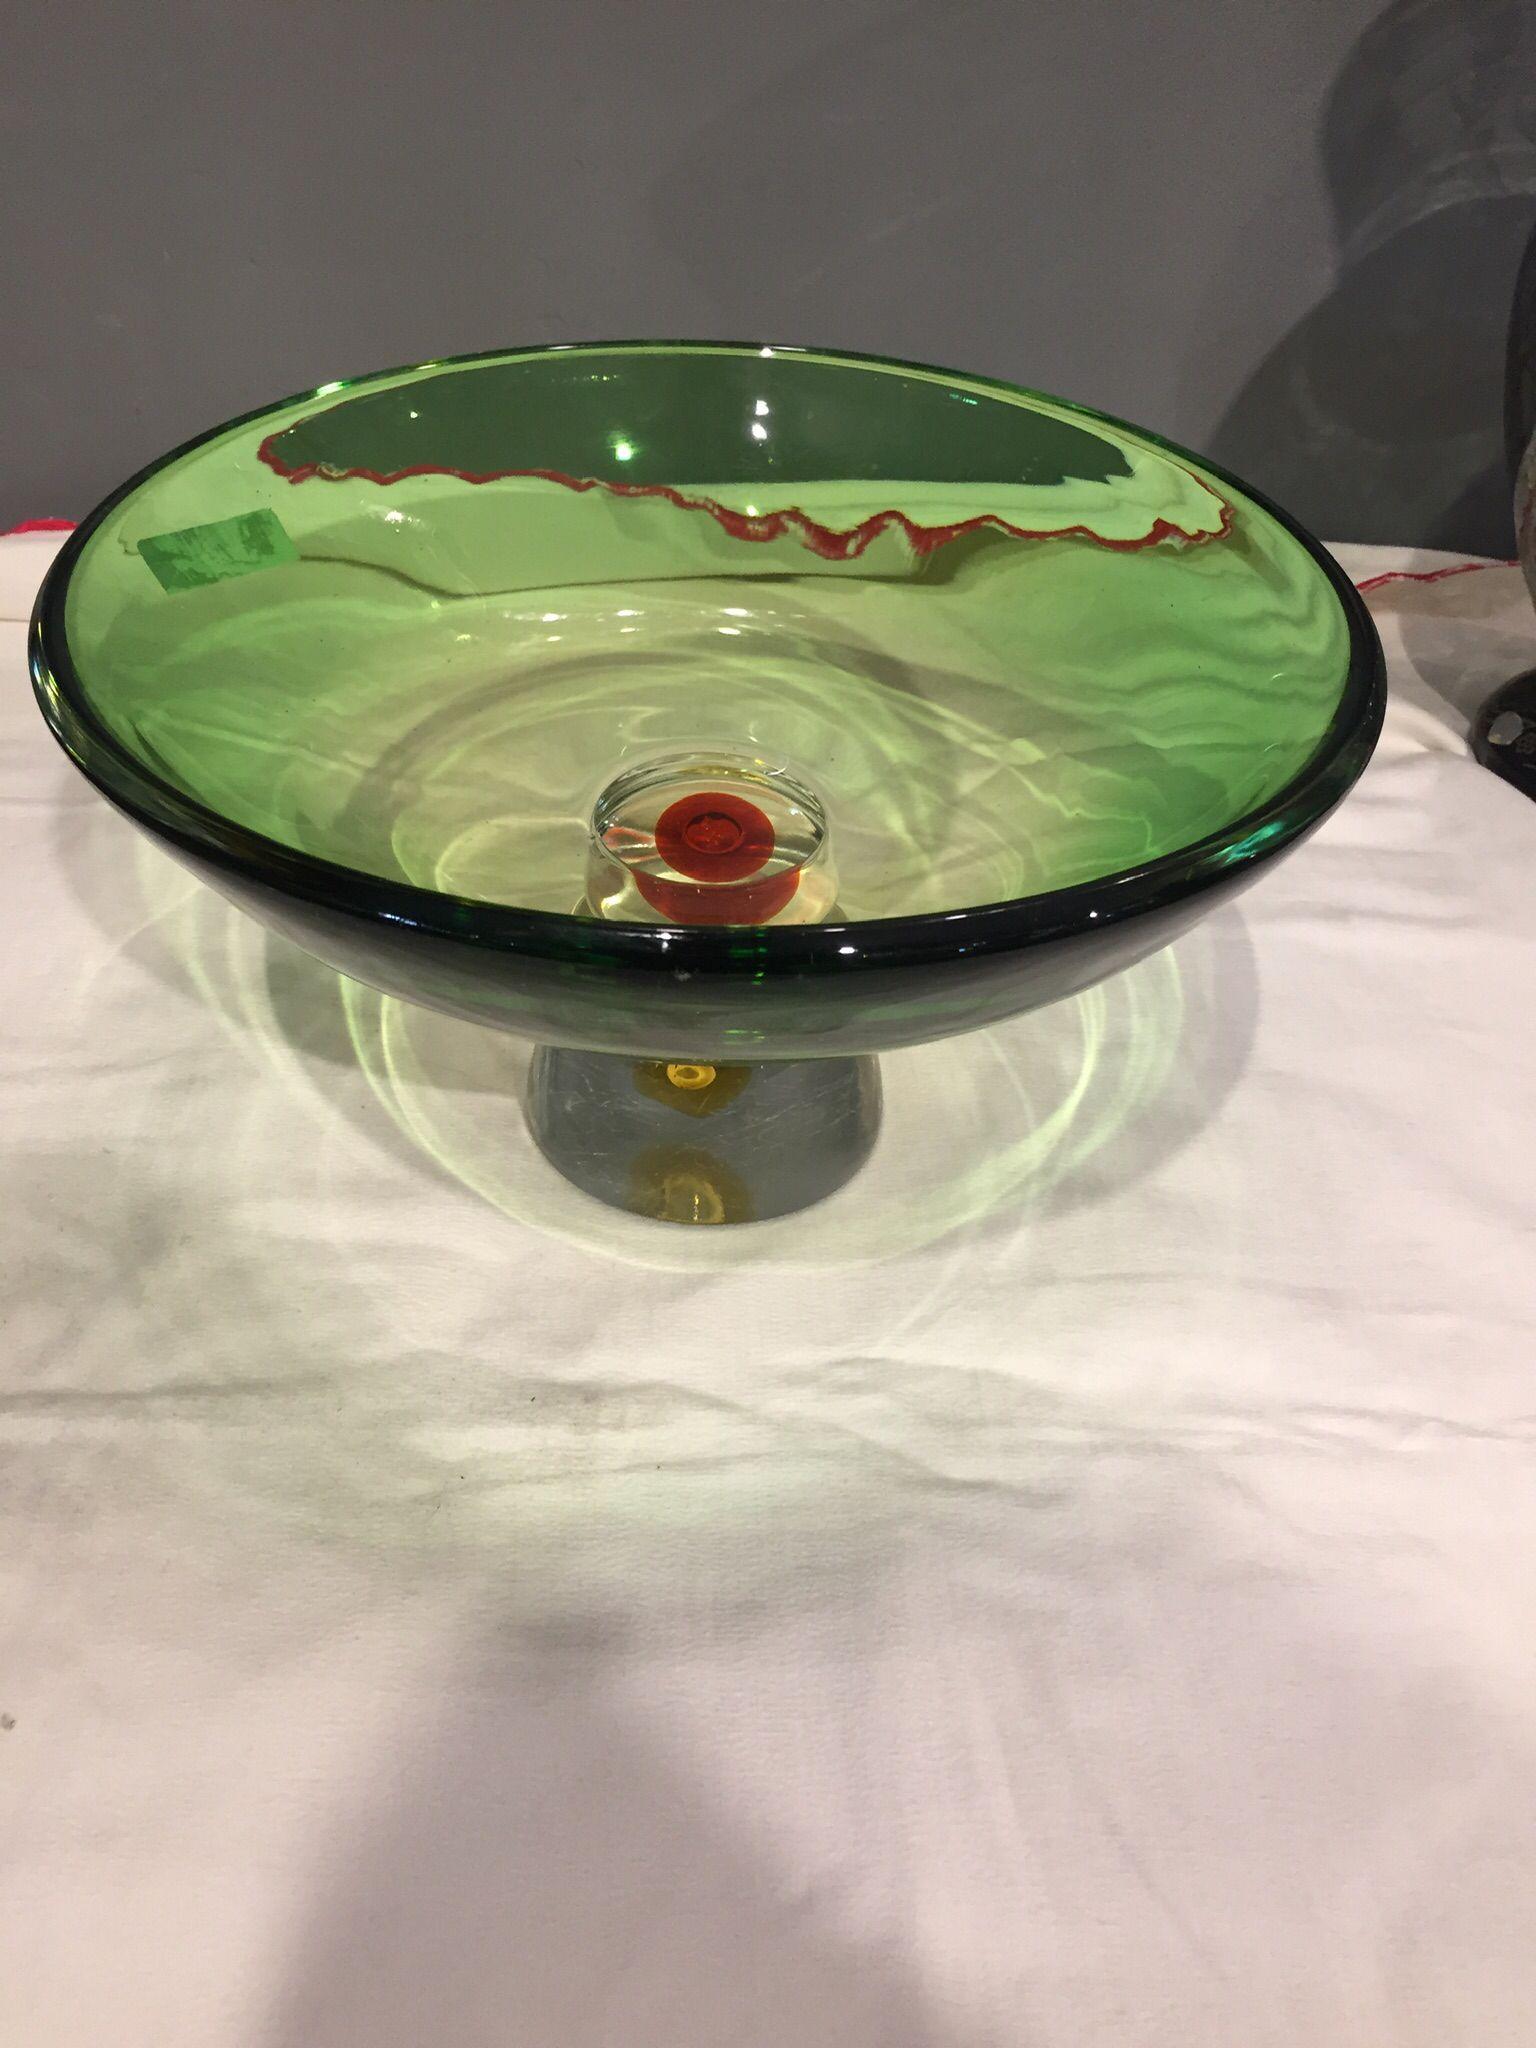 Mid Century Modern, Amazing, Murano Sommerso Green Yellow Red Geode Large Murano Glass Bowl. Attributed to Fratelli Toso Murano - Venice - Italy
This artistic glass bowl is made with transparent glass with shades from green to yellow and red cased